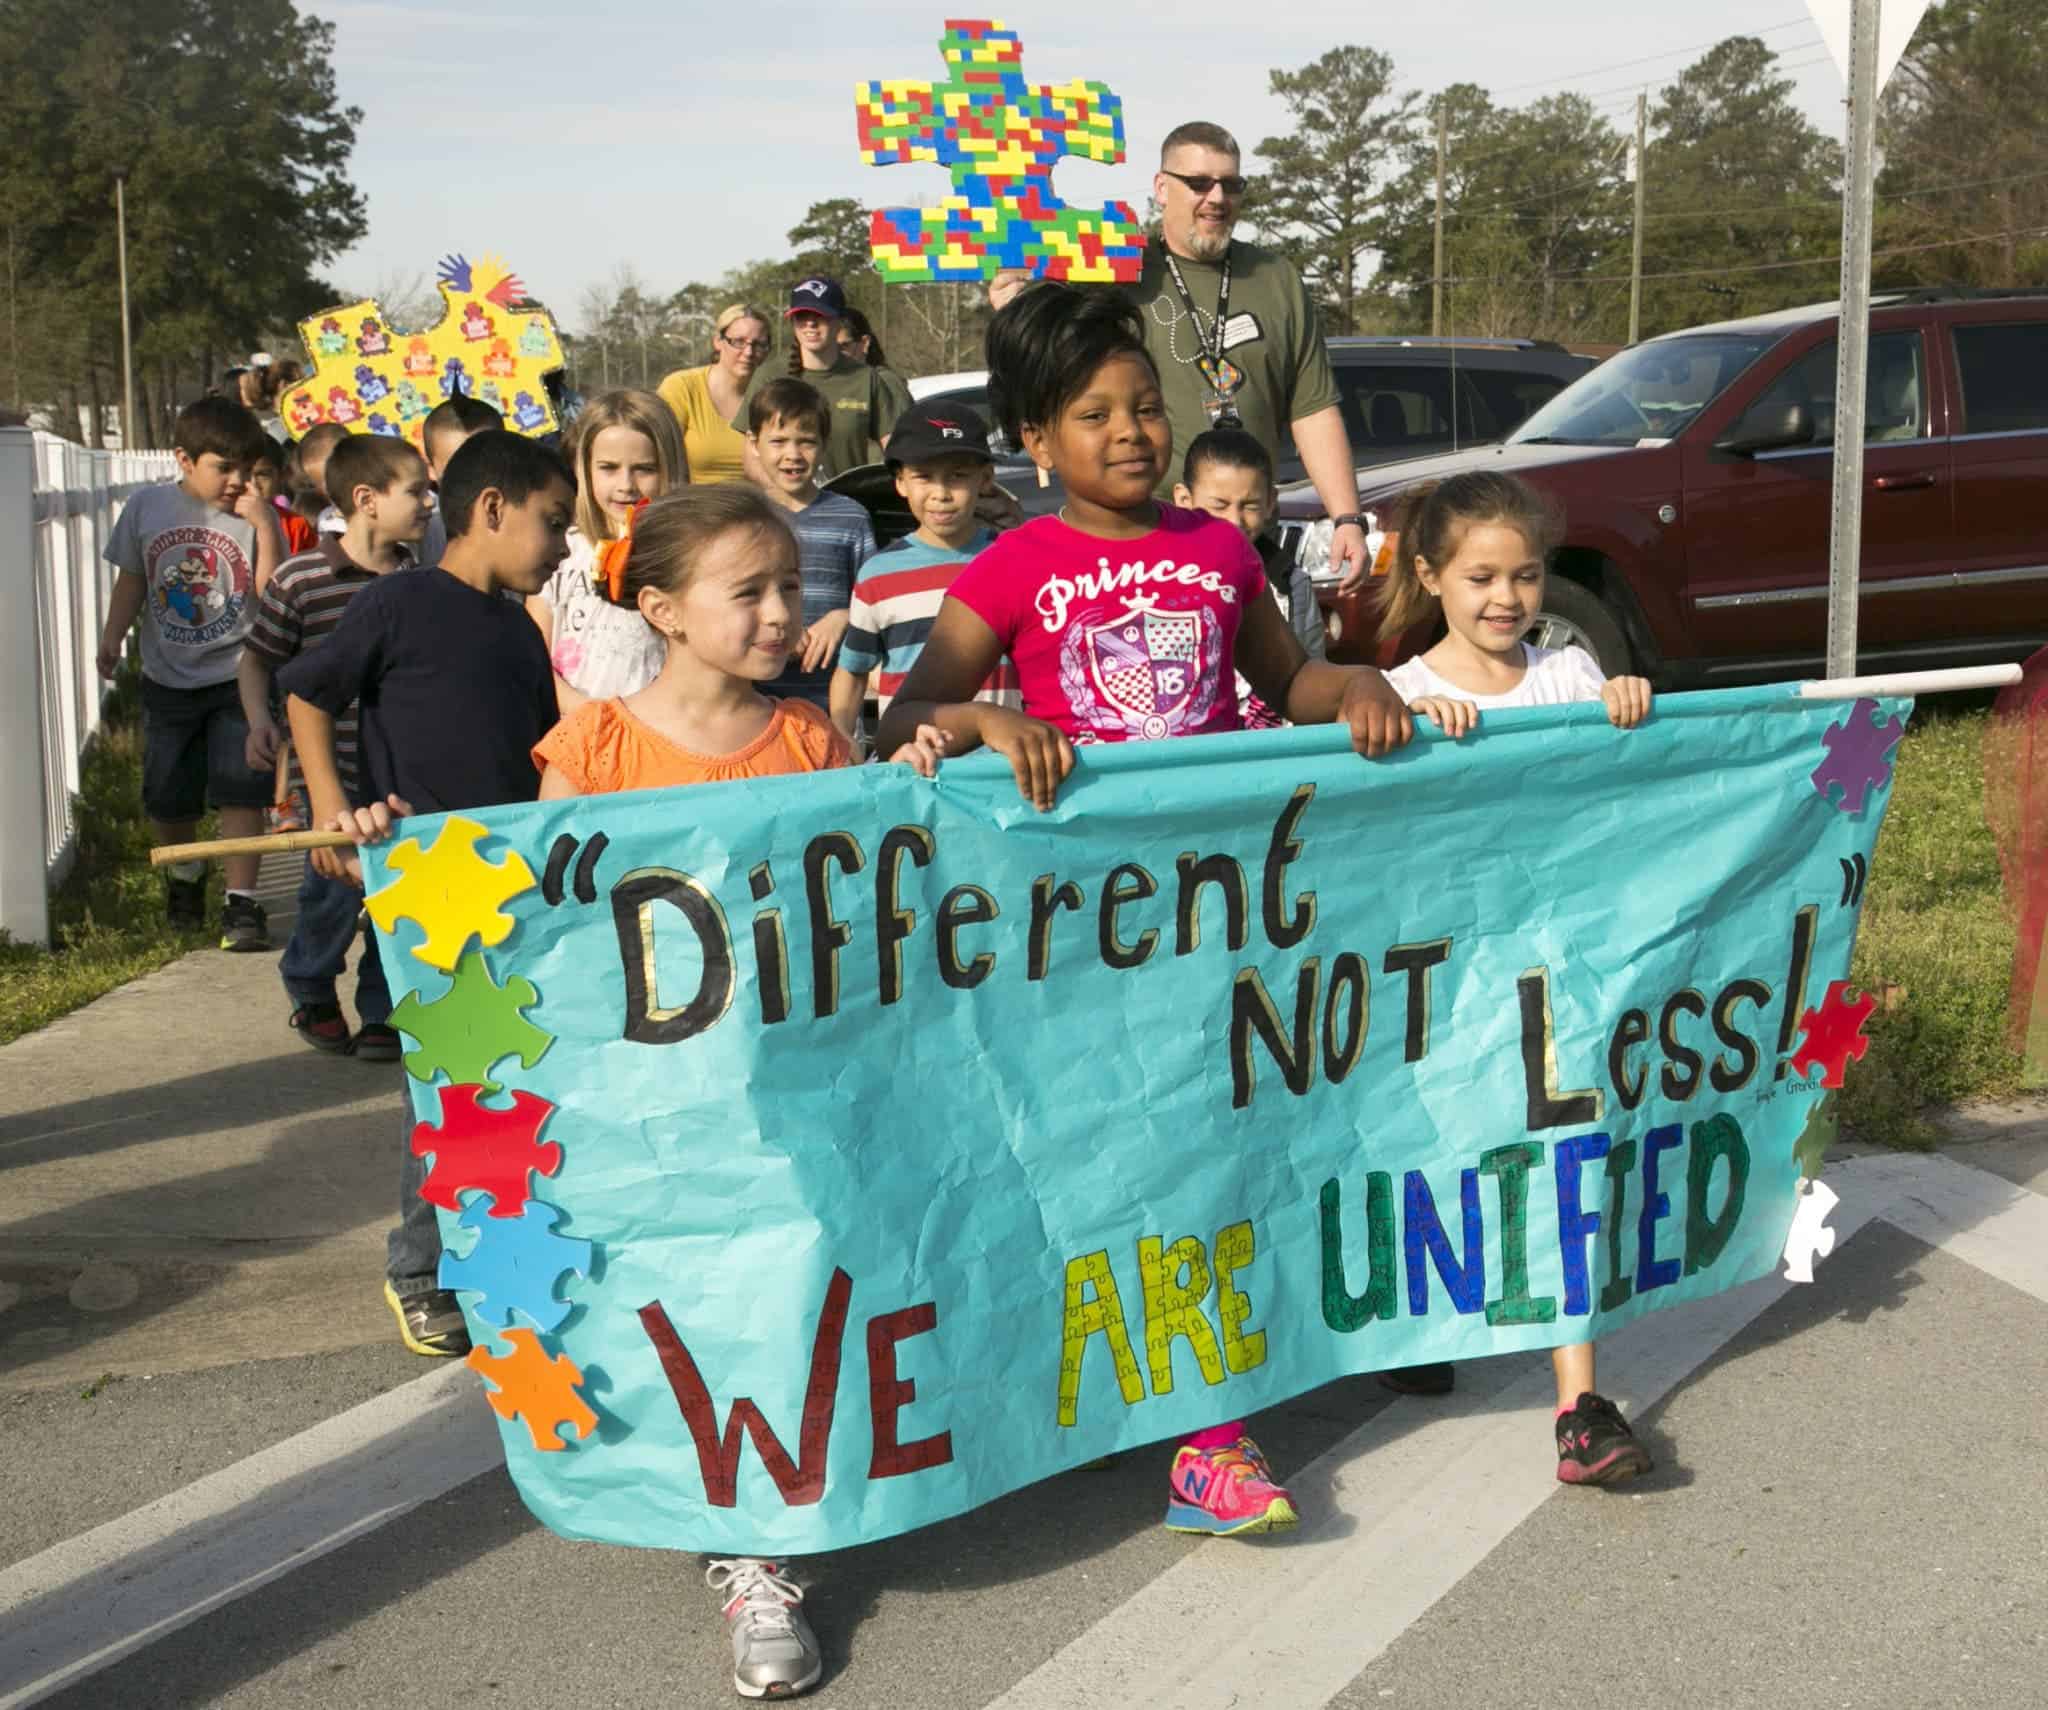 Students and families walk to support Autism Awareness Month.
Photo by: Lance Cpl. Andrea Ovall